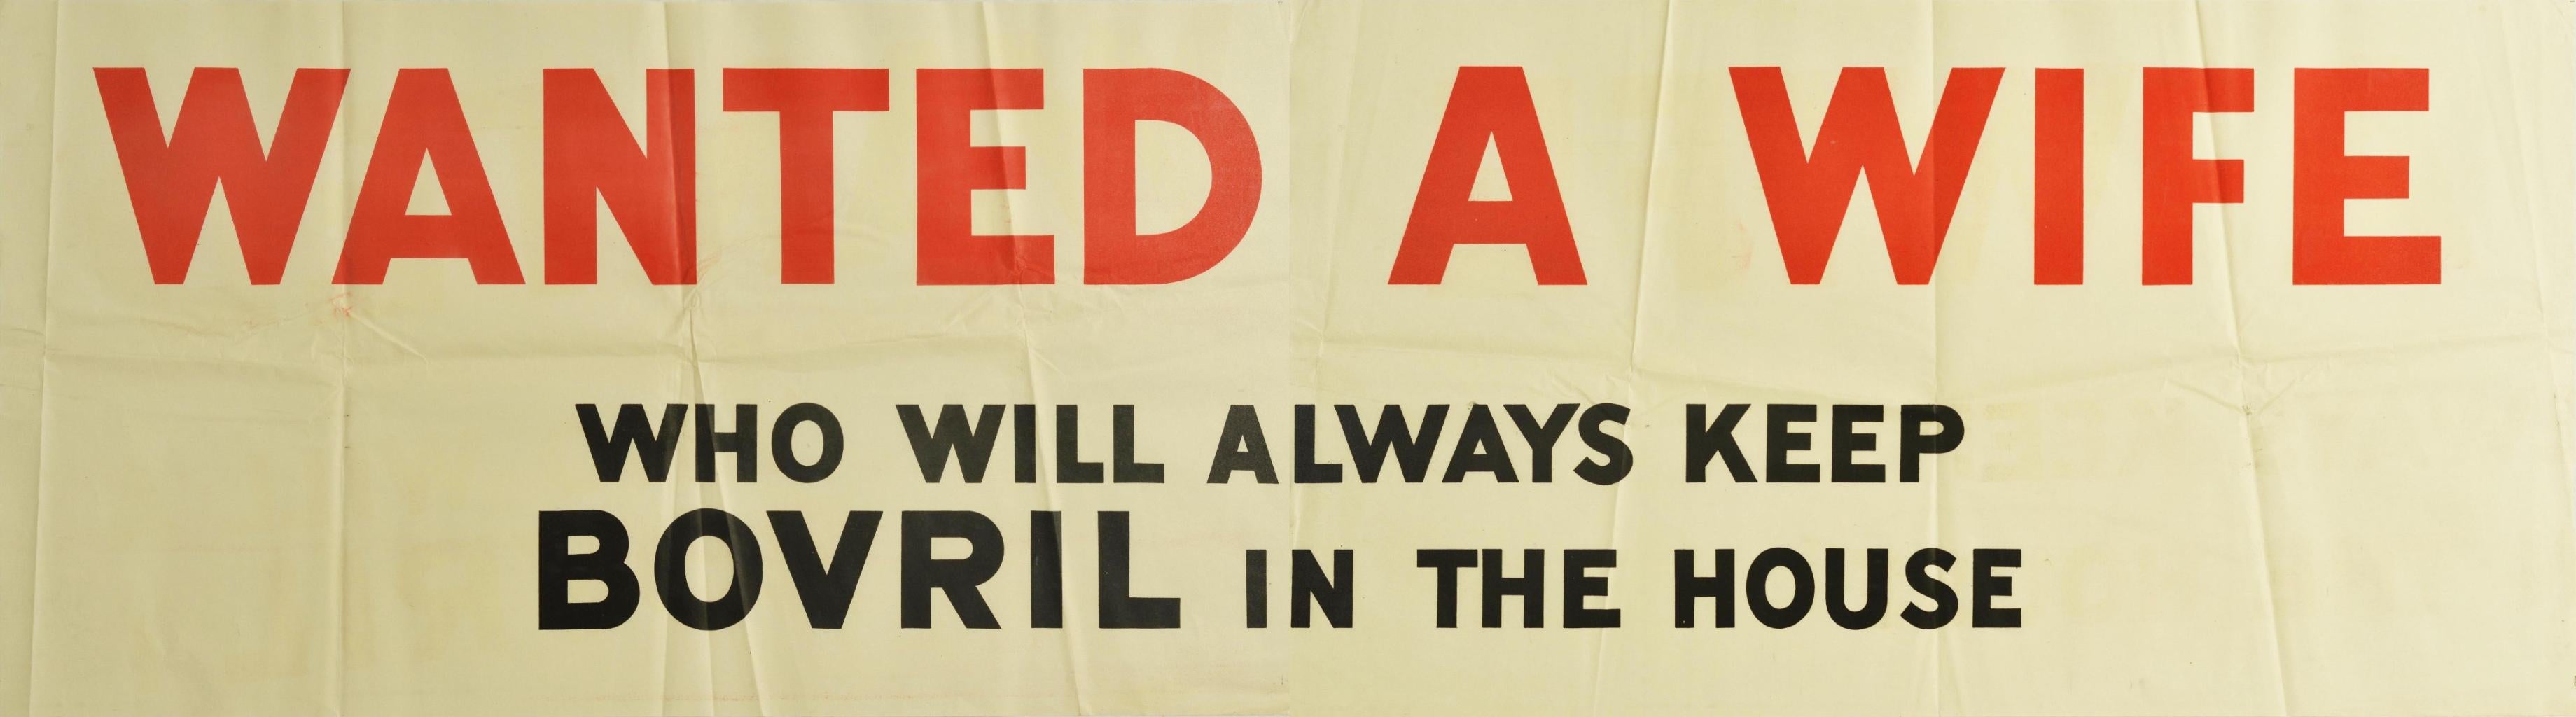 Original vintage food advertising poster for Bovril - Wanted a wife who will always keep Bovril in the house - featuring bold red and black lettering on a white background. Printed in Britain in the 1930s, this campaign used puns and word play to